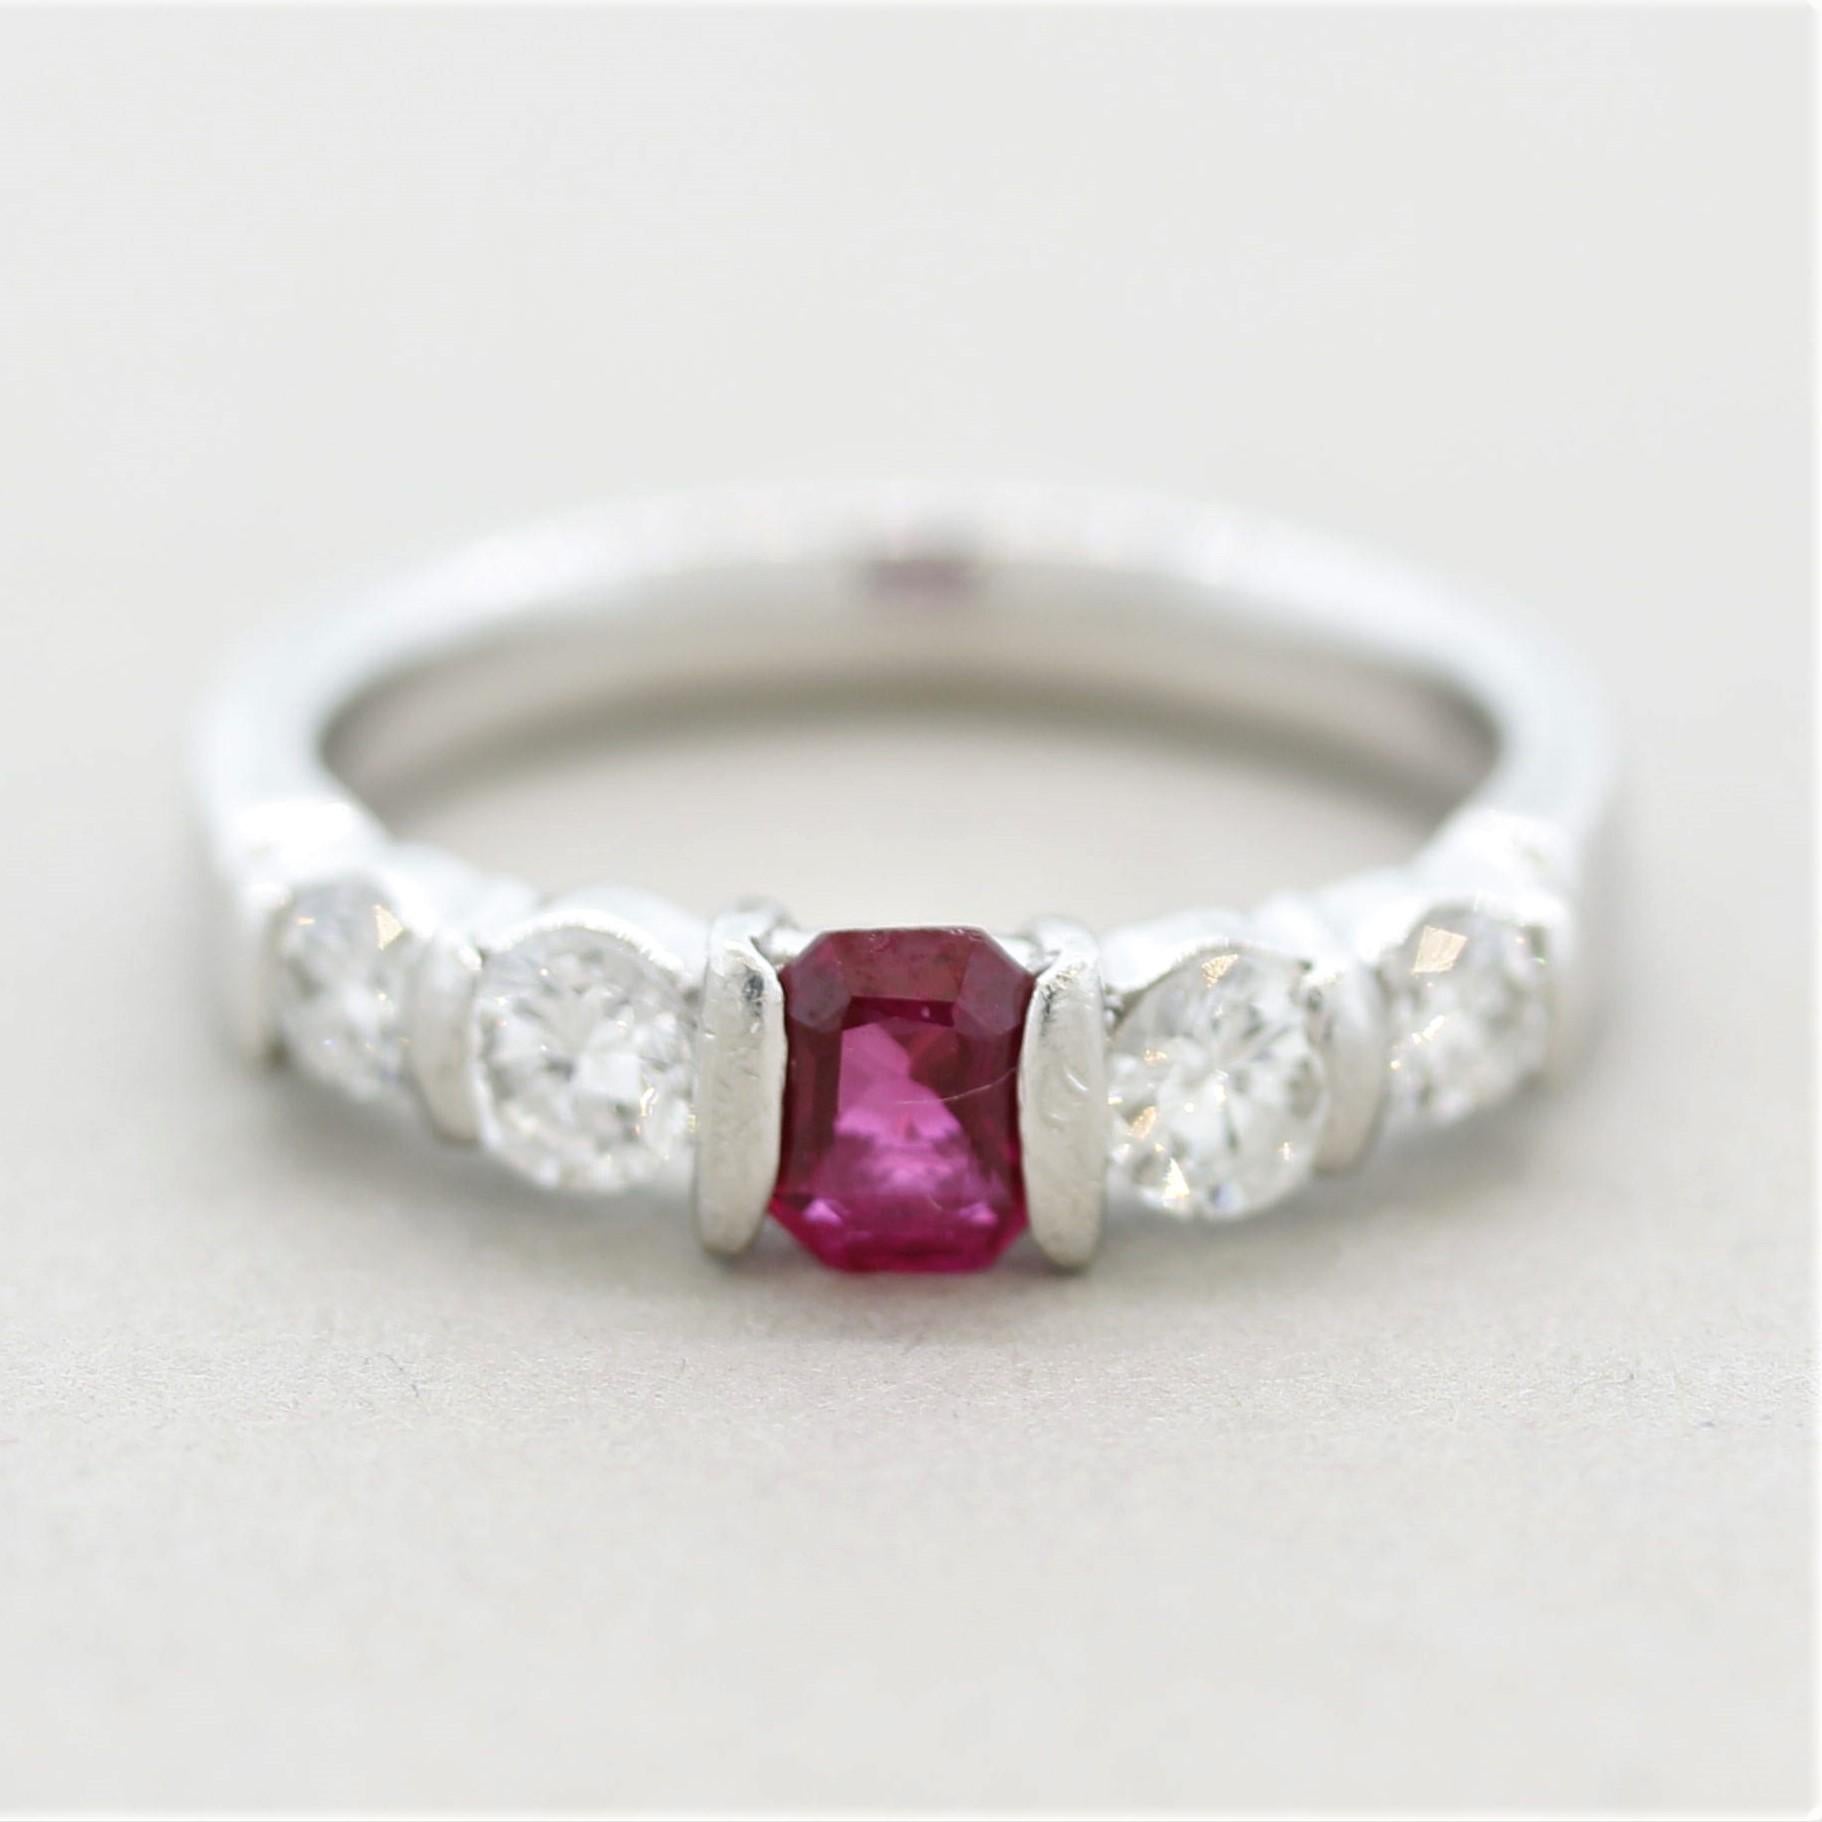 A simple set chic and stylish platinum band featuring ruby and diamonds! The ruby weighs 0.48 carats and has a bright vivid pinkish-red color. It is accented by 4 large round brilliant-cut diamonds weighing a total of 0.60 carats. Hand-fabricated in